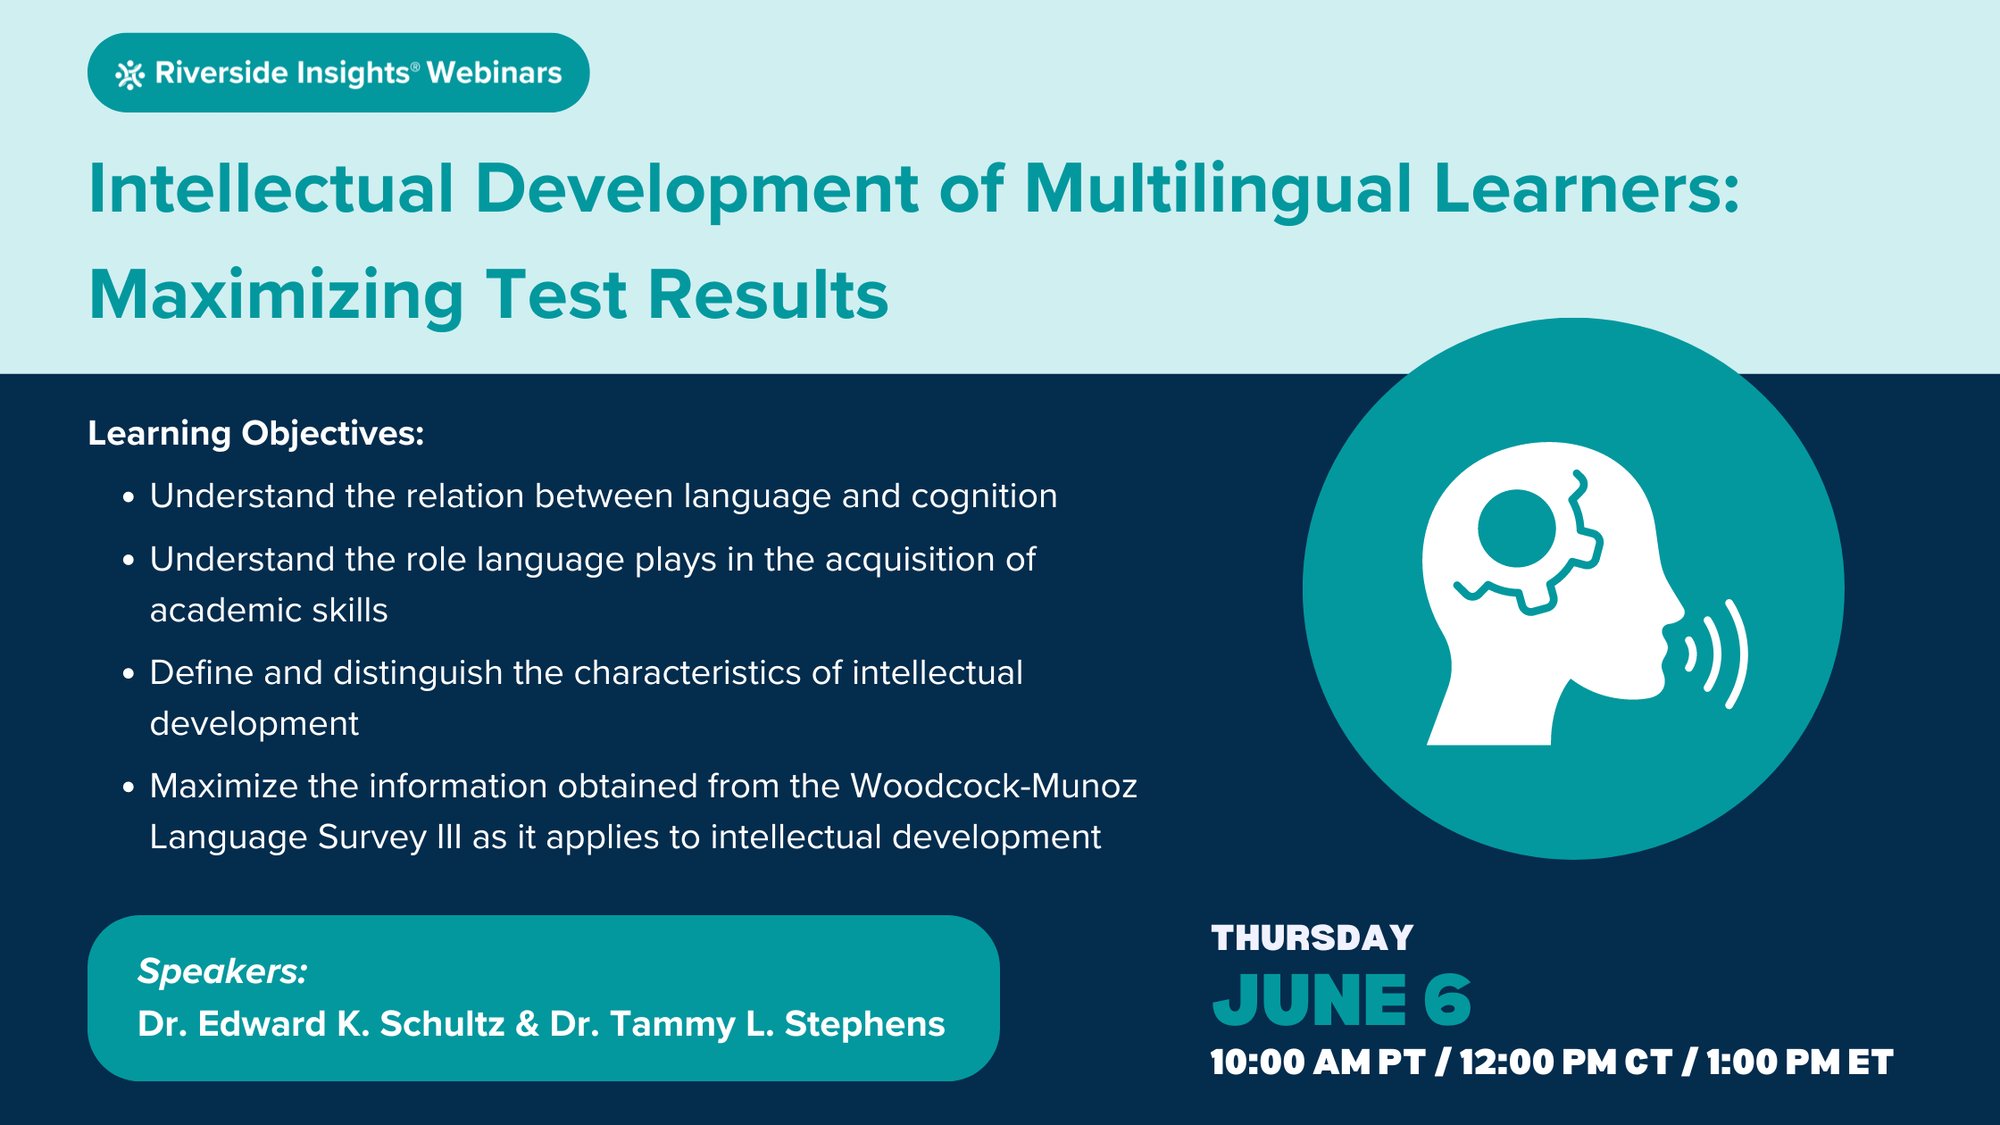 Intellectual Development of Multilingual Learners: Maximizing Test Results